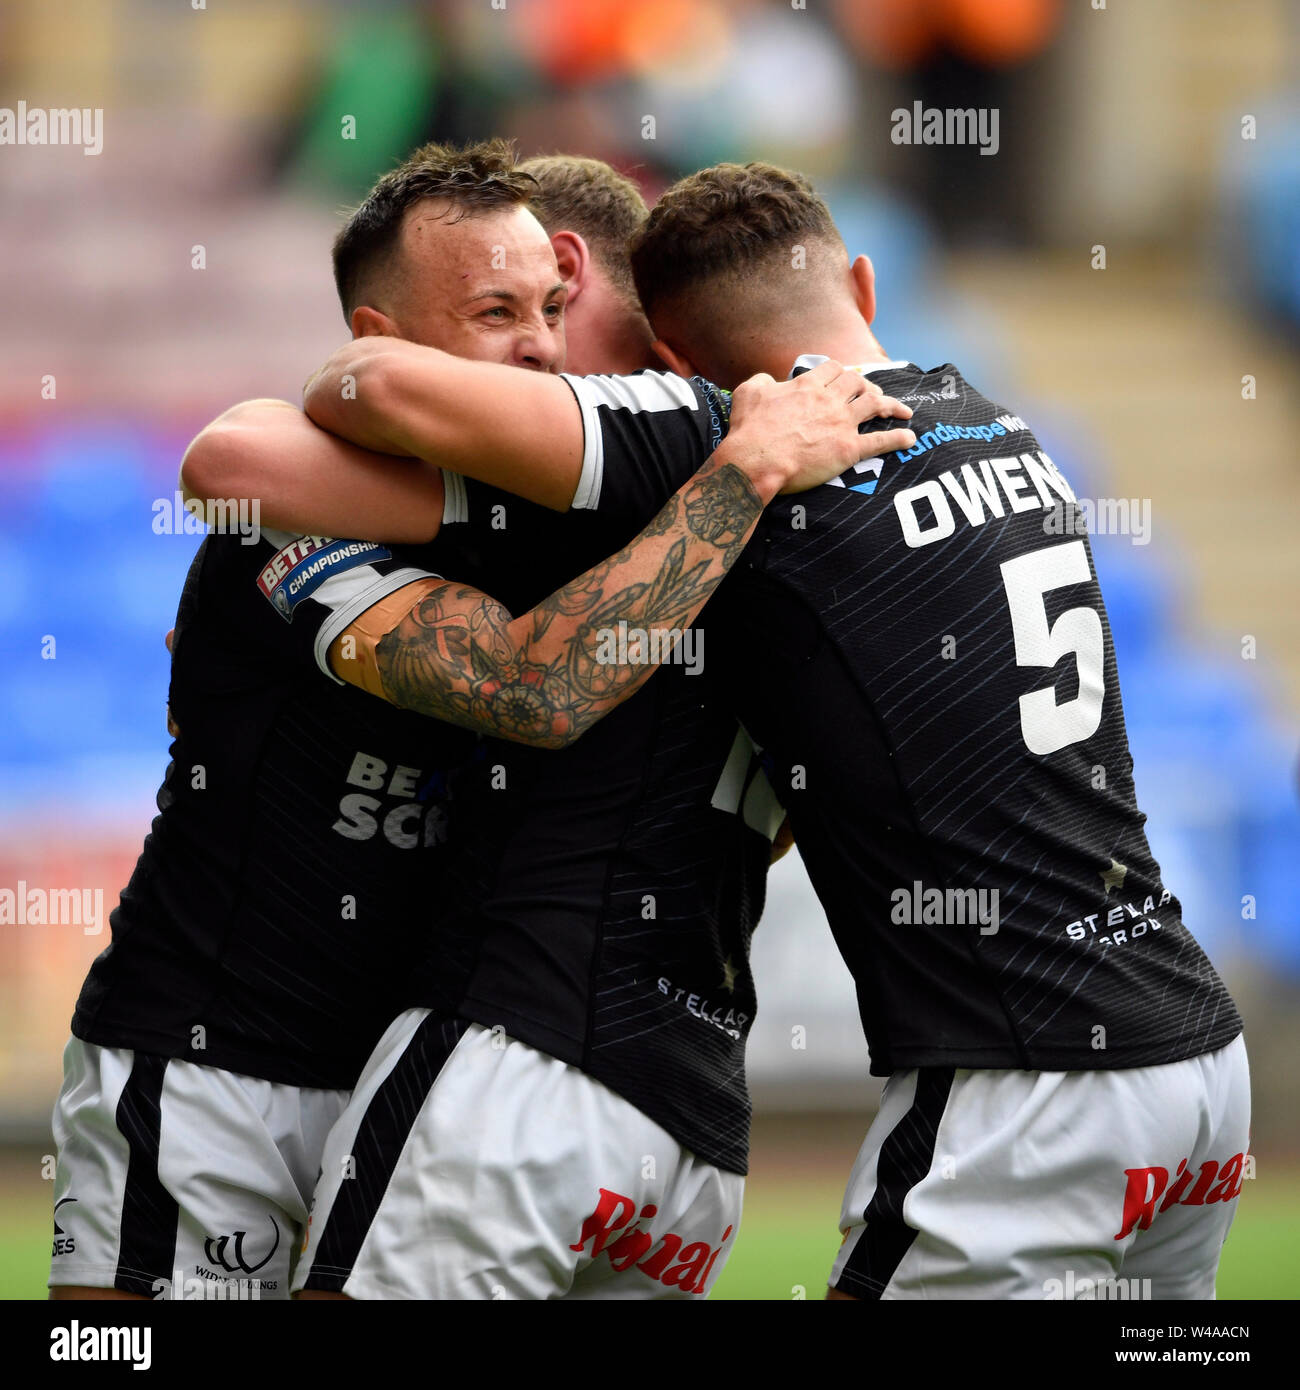 Halton Stadium, Widnes, Cheshire, UK. 21st July, 2019. Betfred Rugby League, Widnes Vikings versus Toronto Wolfpack; Jack Owens of Widnes Vikings celebrates with try scorer Danny Craven, after he made the score 10 - 4 Credit: Action Plus Sports/Alamy Live News Stock Photo